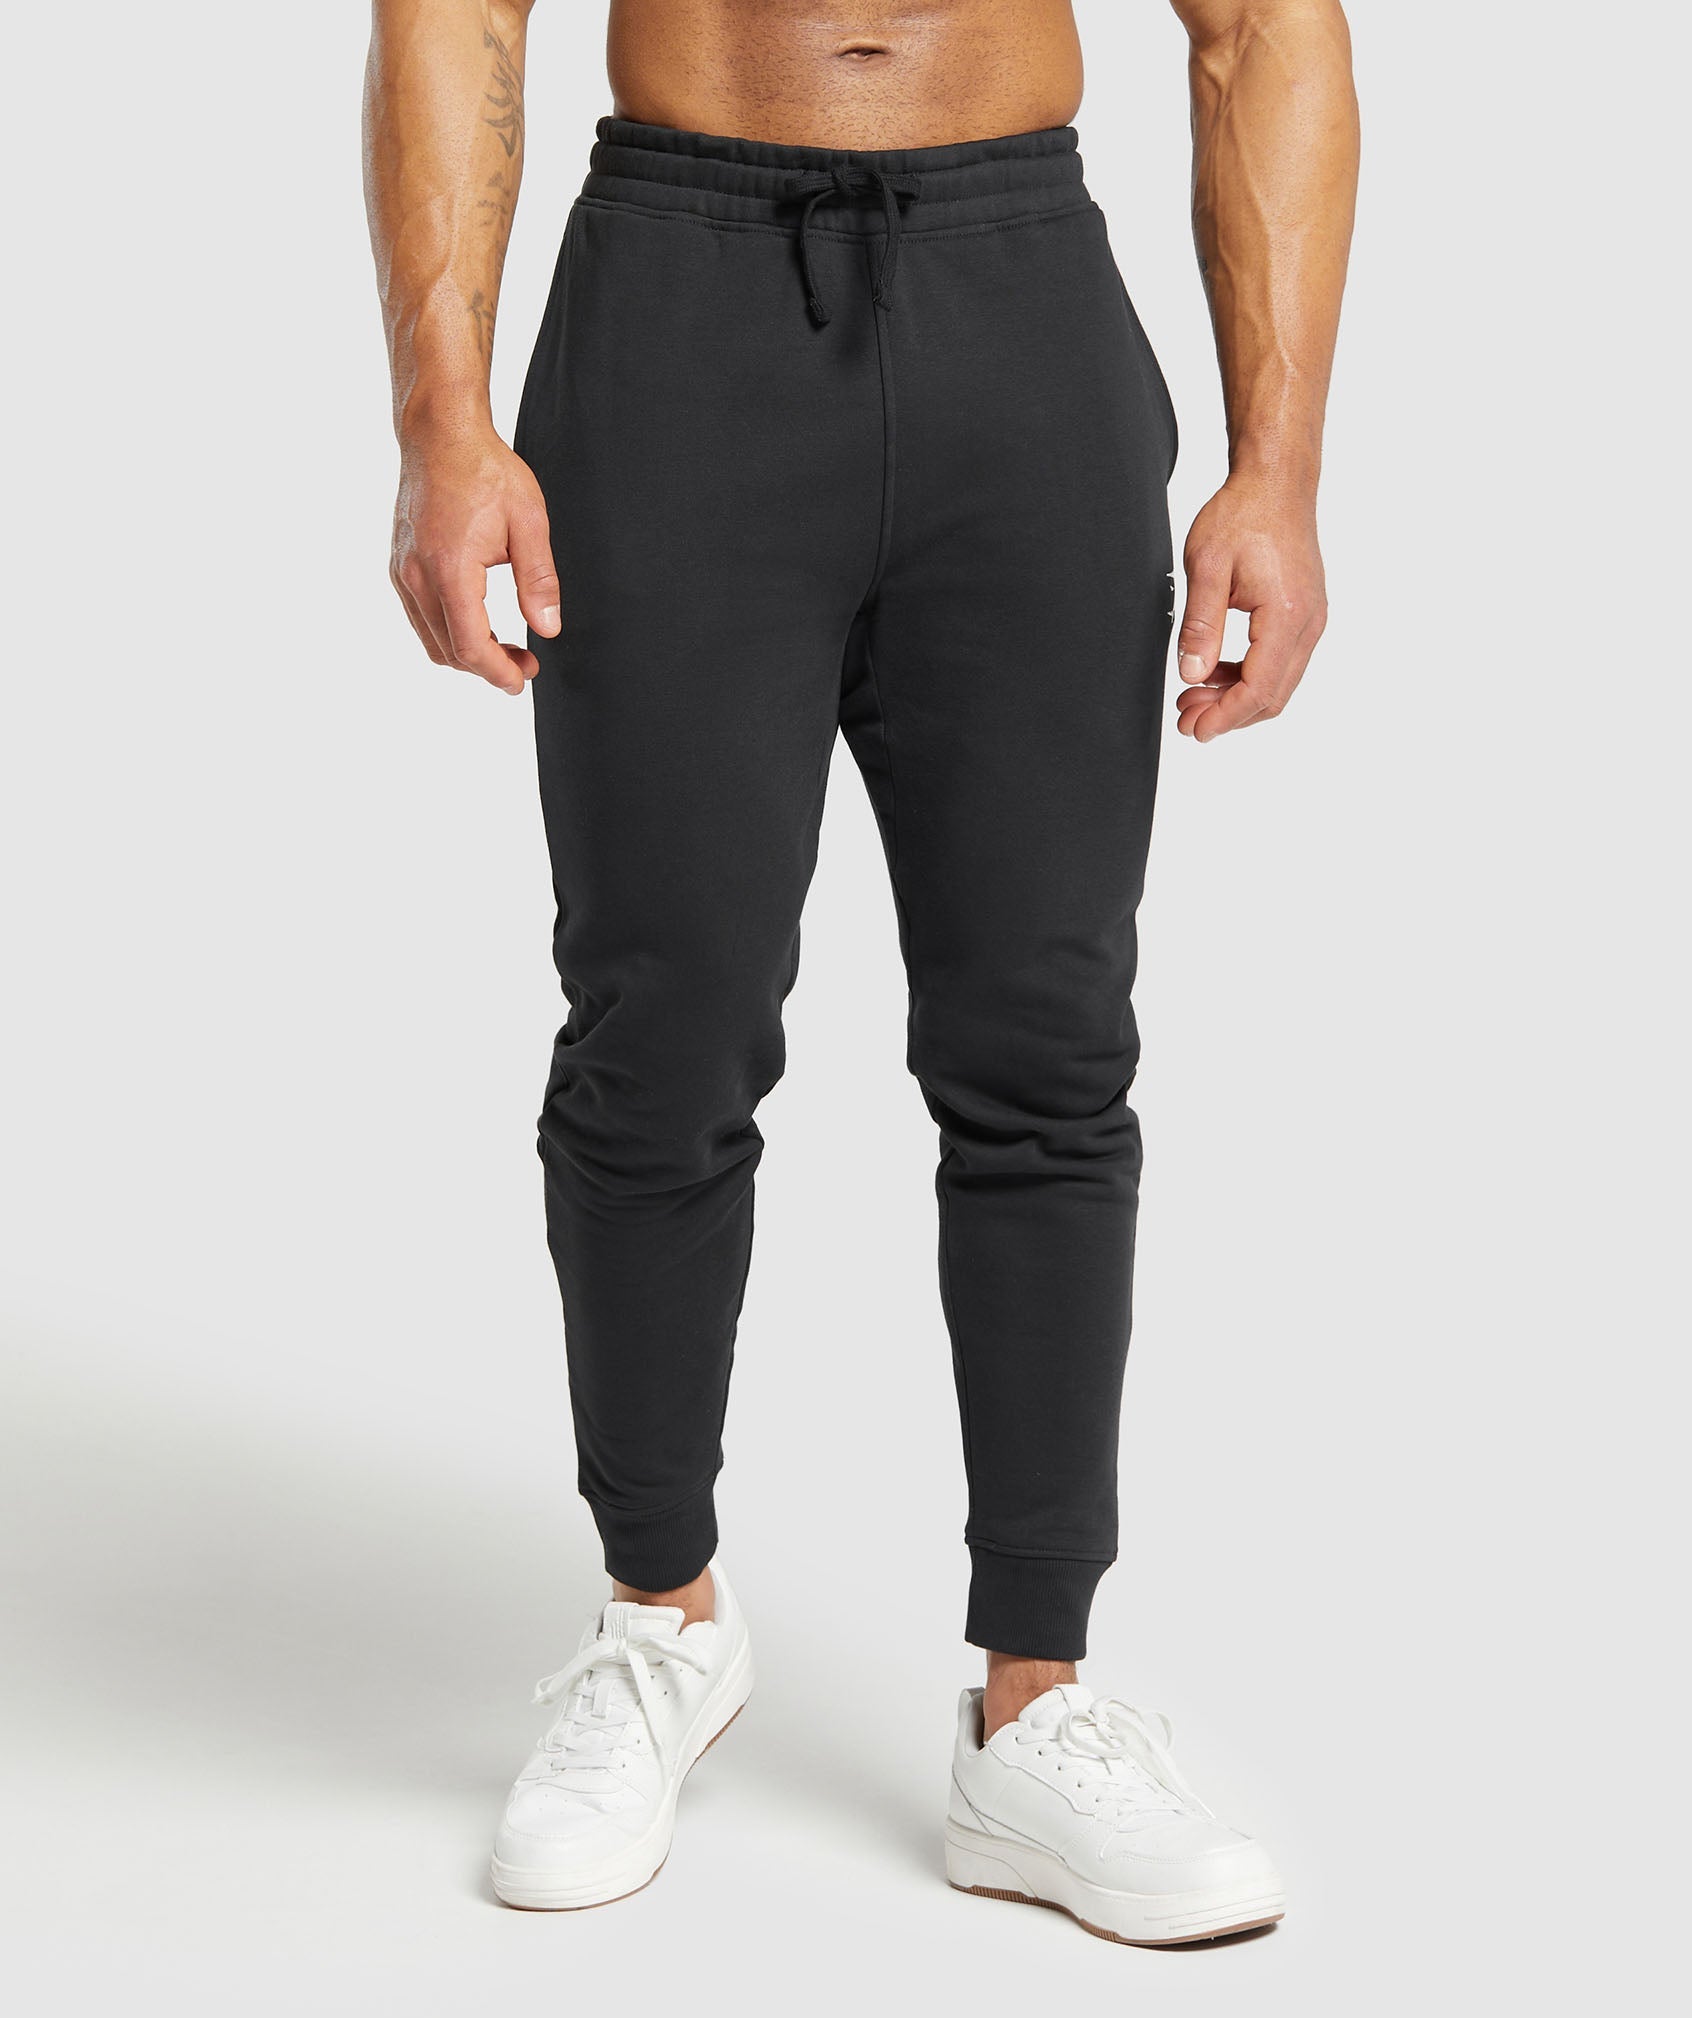 Crest Joggers in Black - view 1